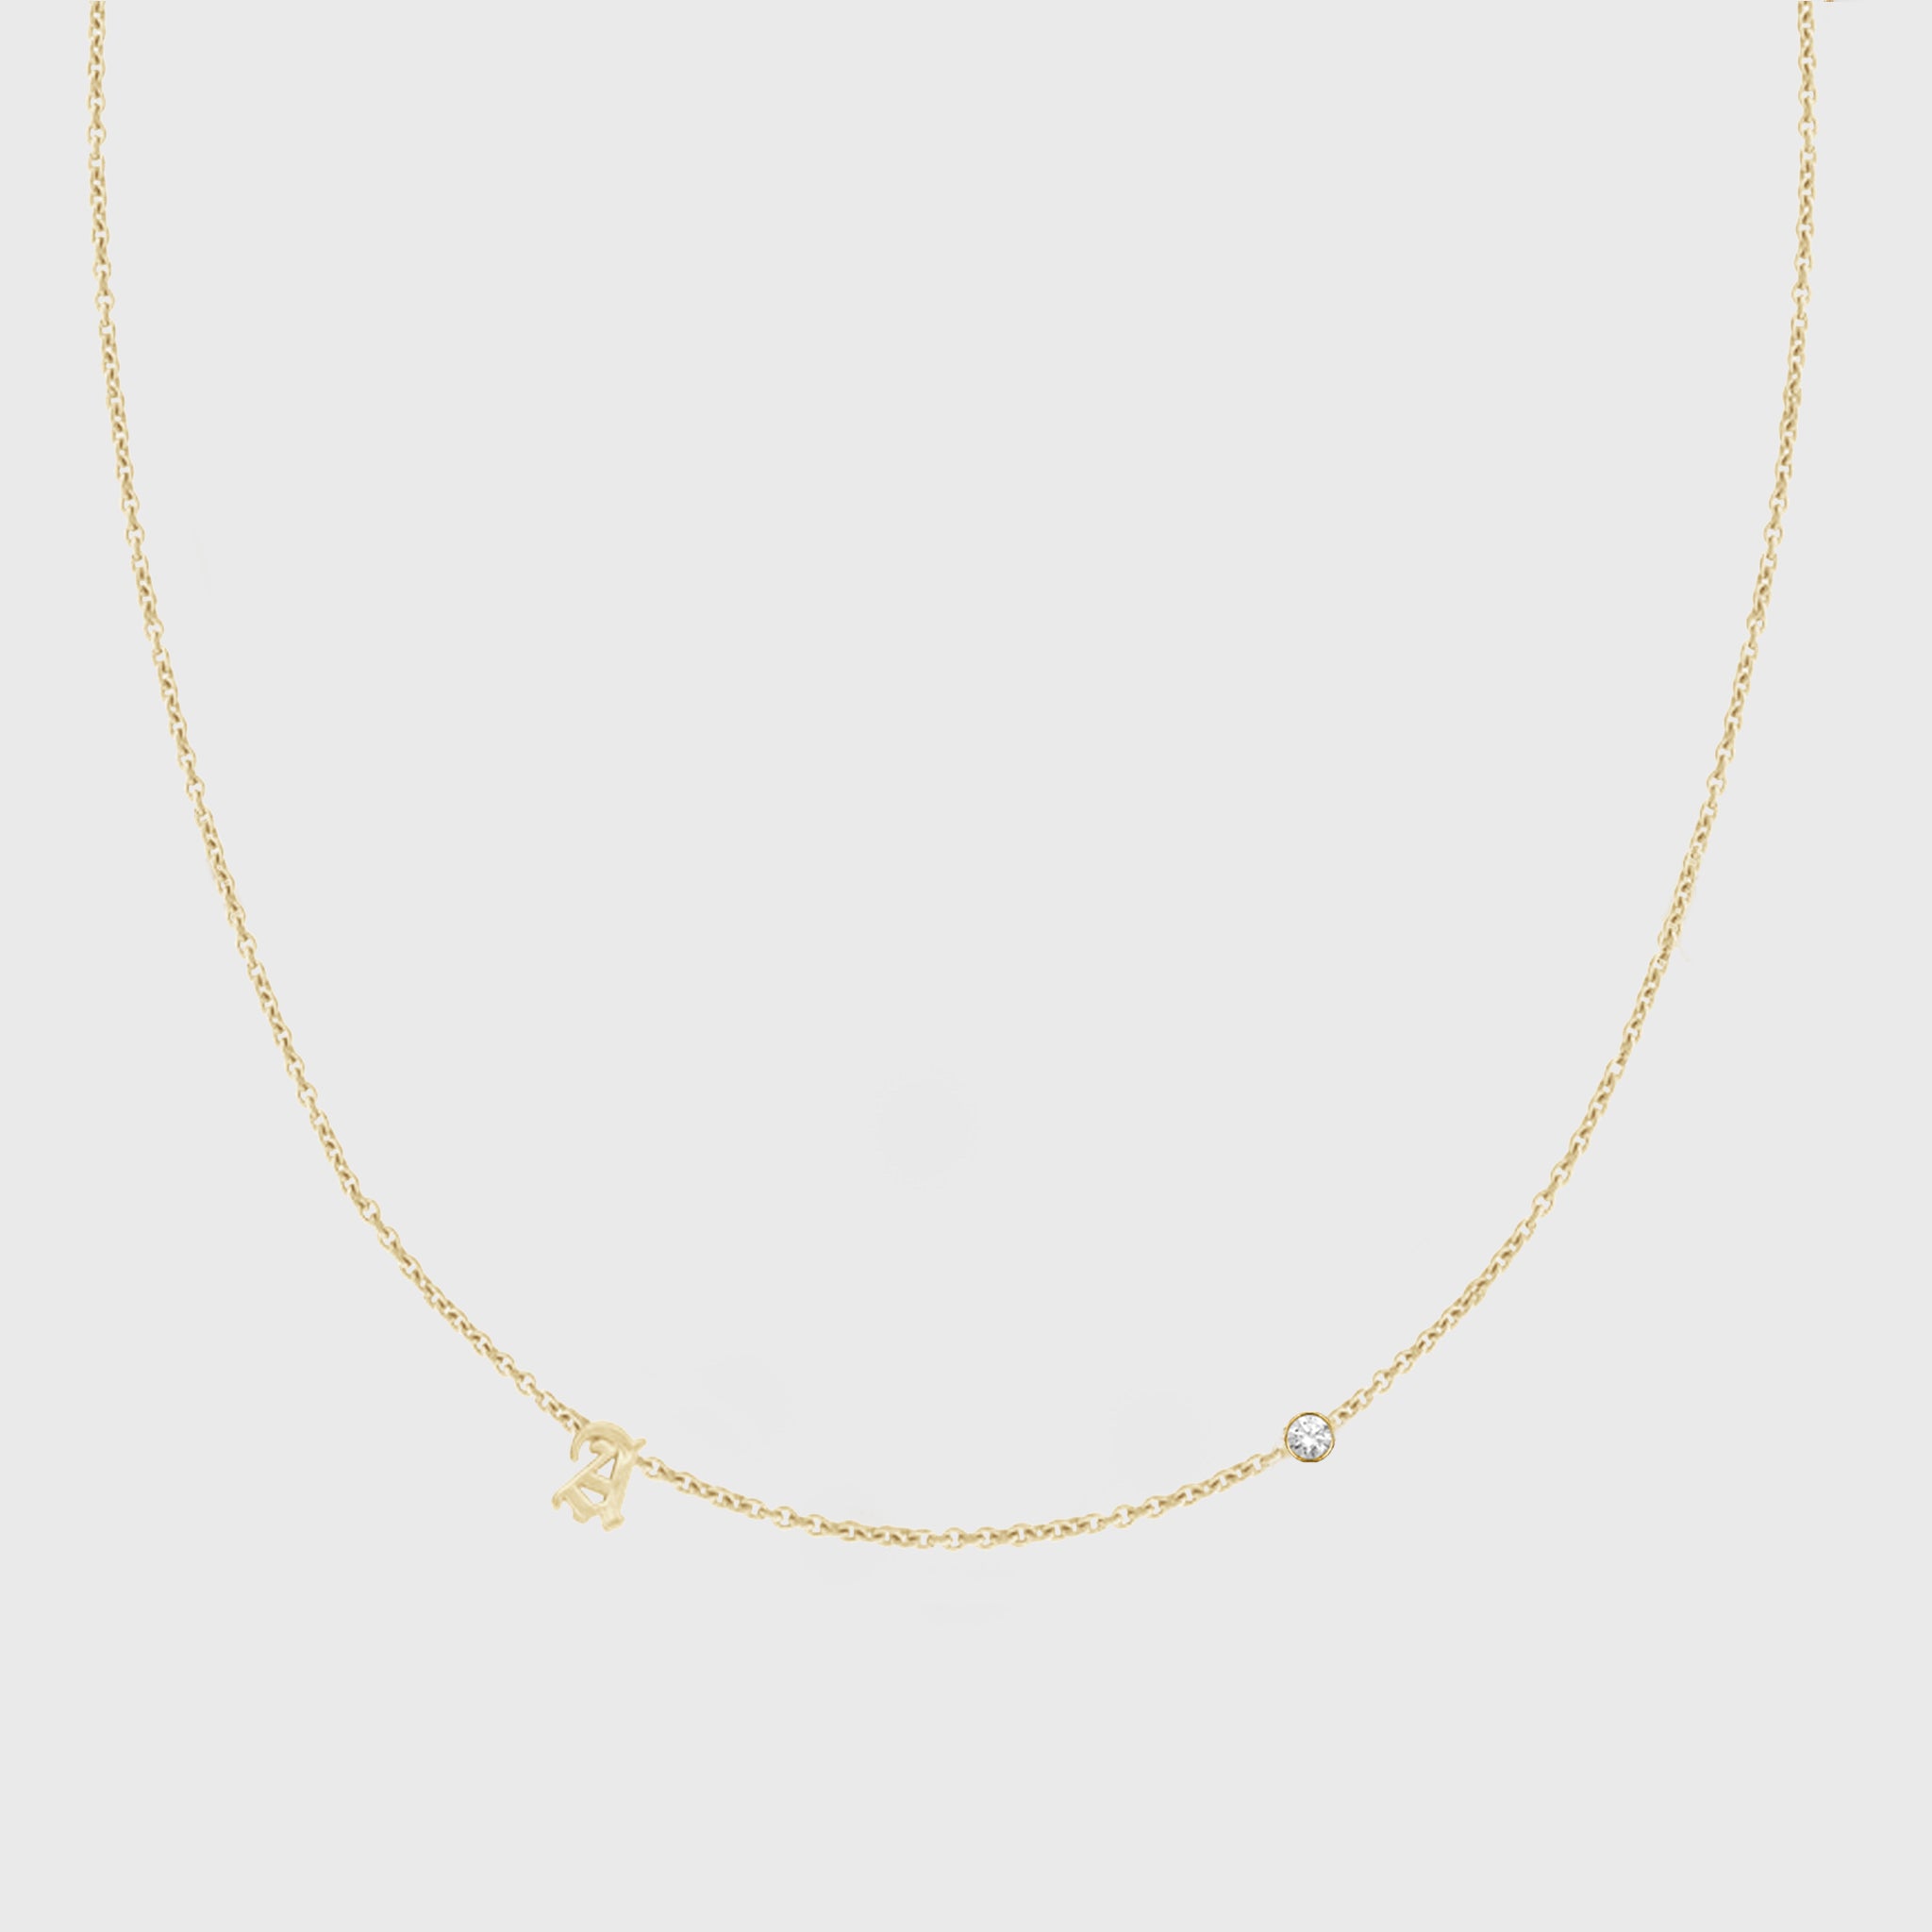 14k dainty old english initial necklace - 2 letters / diamonds